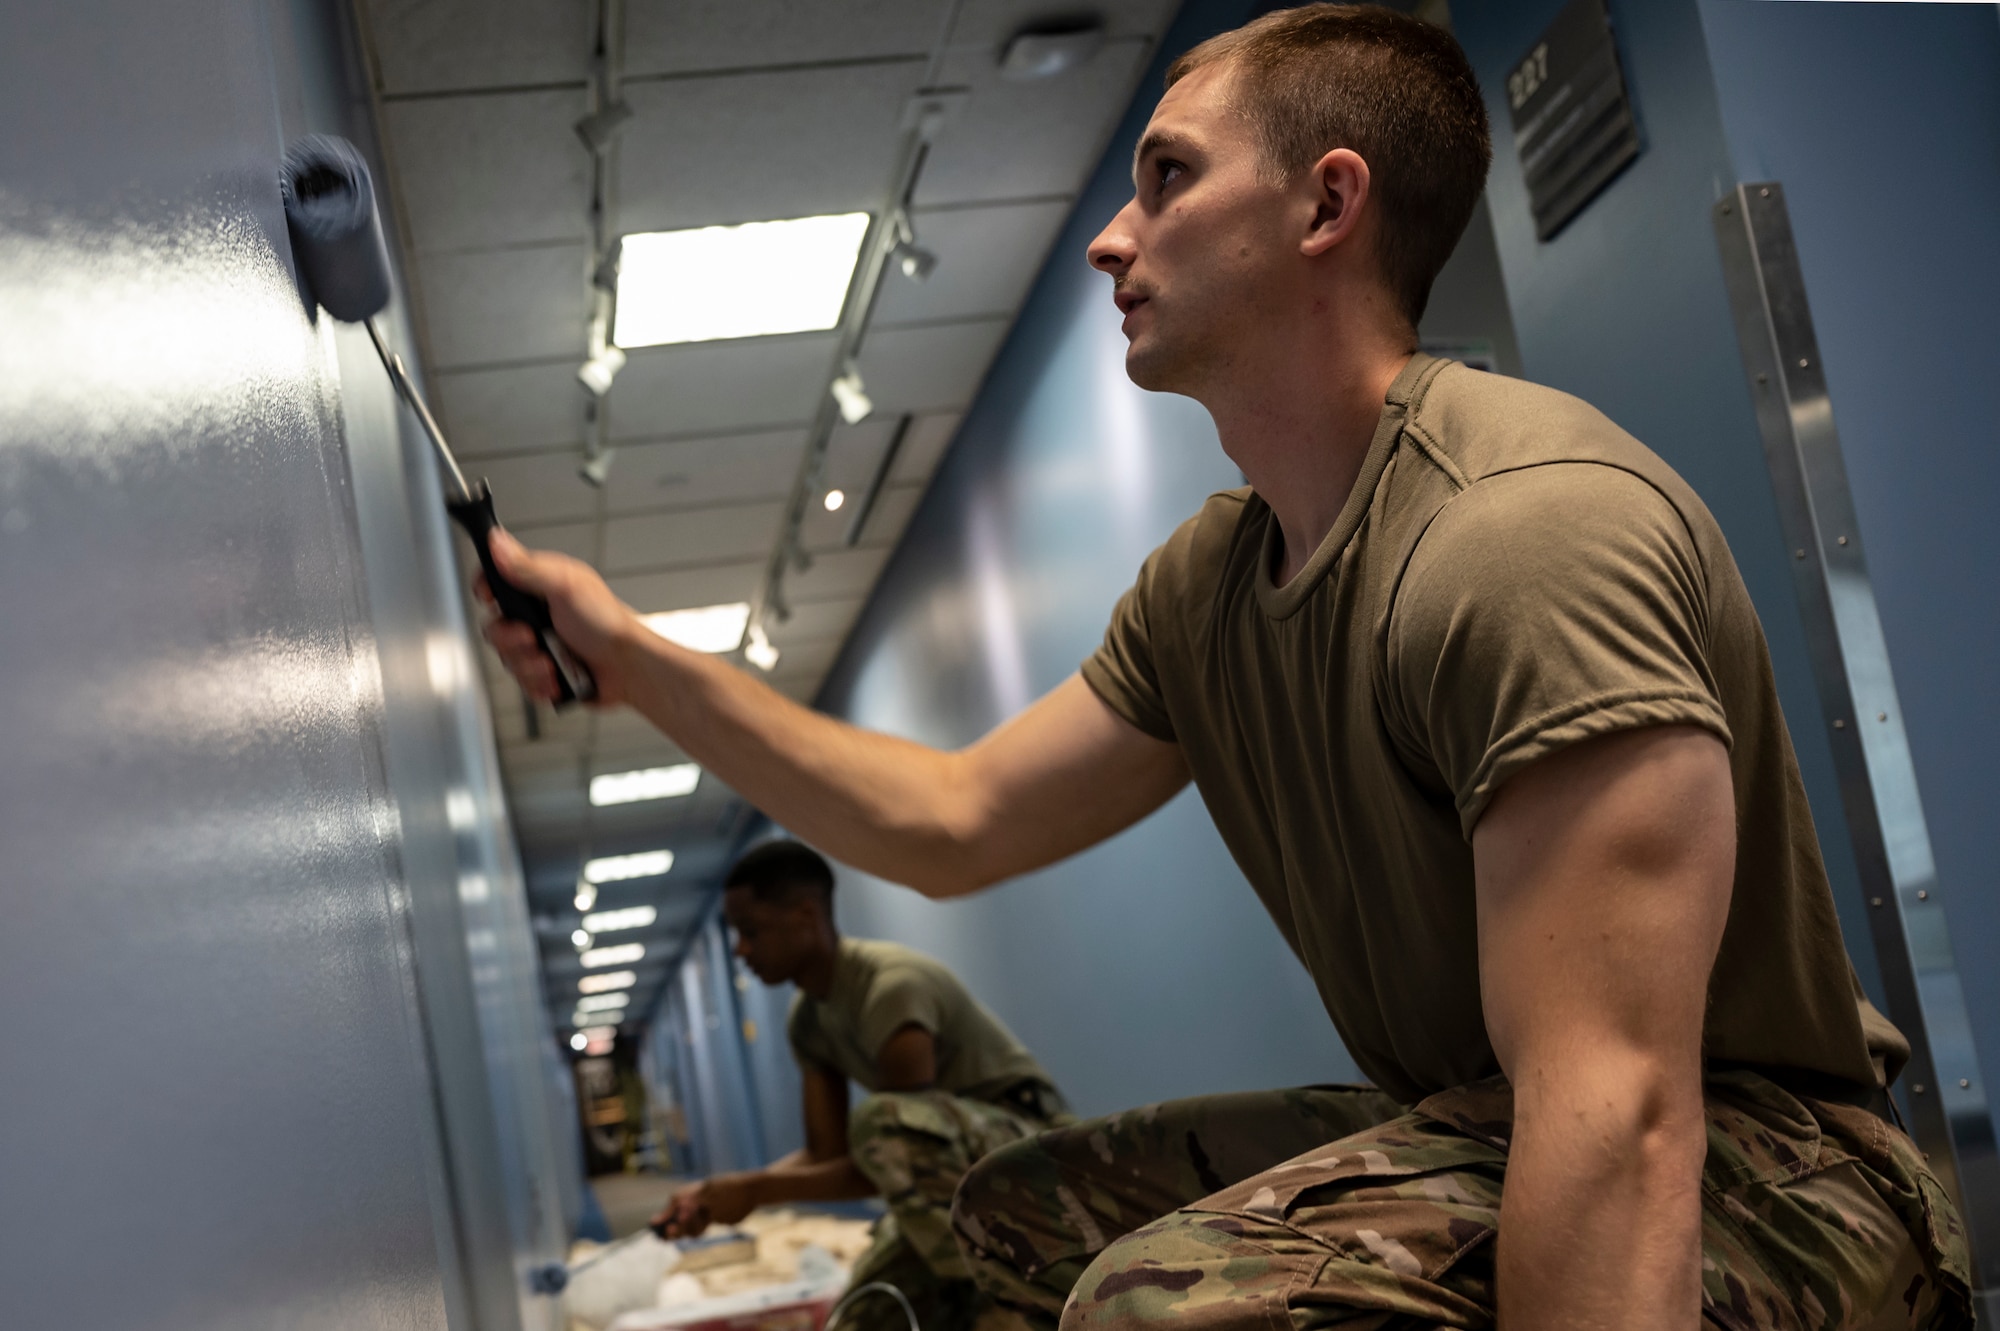 Senior Airman Franklin Geidner, 911th Civil Engineering Squadron roads and ground technician and Staff Sgt. Terique Howard, 911th CES structures technician, paint a wall in the headquarters building at the Pittsburgh International Airport Air Reserve Station, Pennsylvania, June 9, 2021.